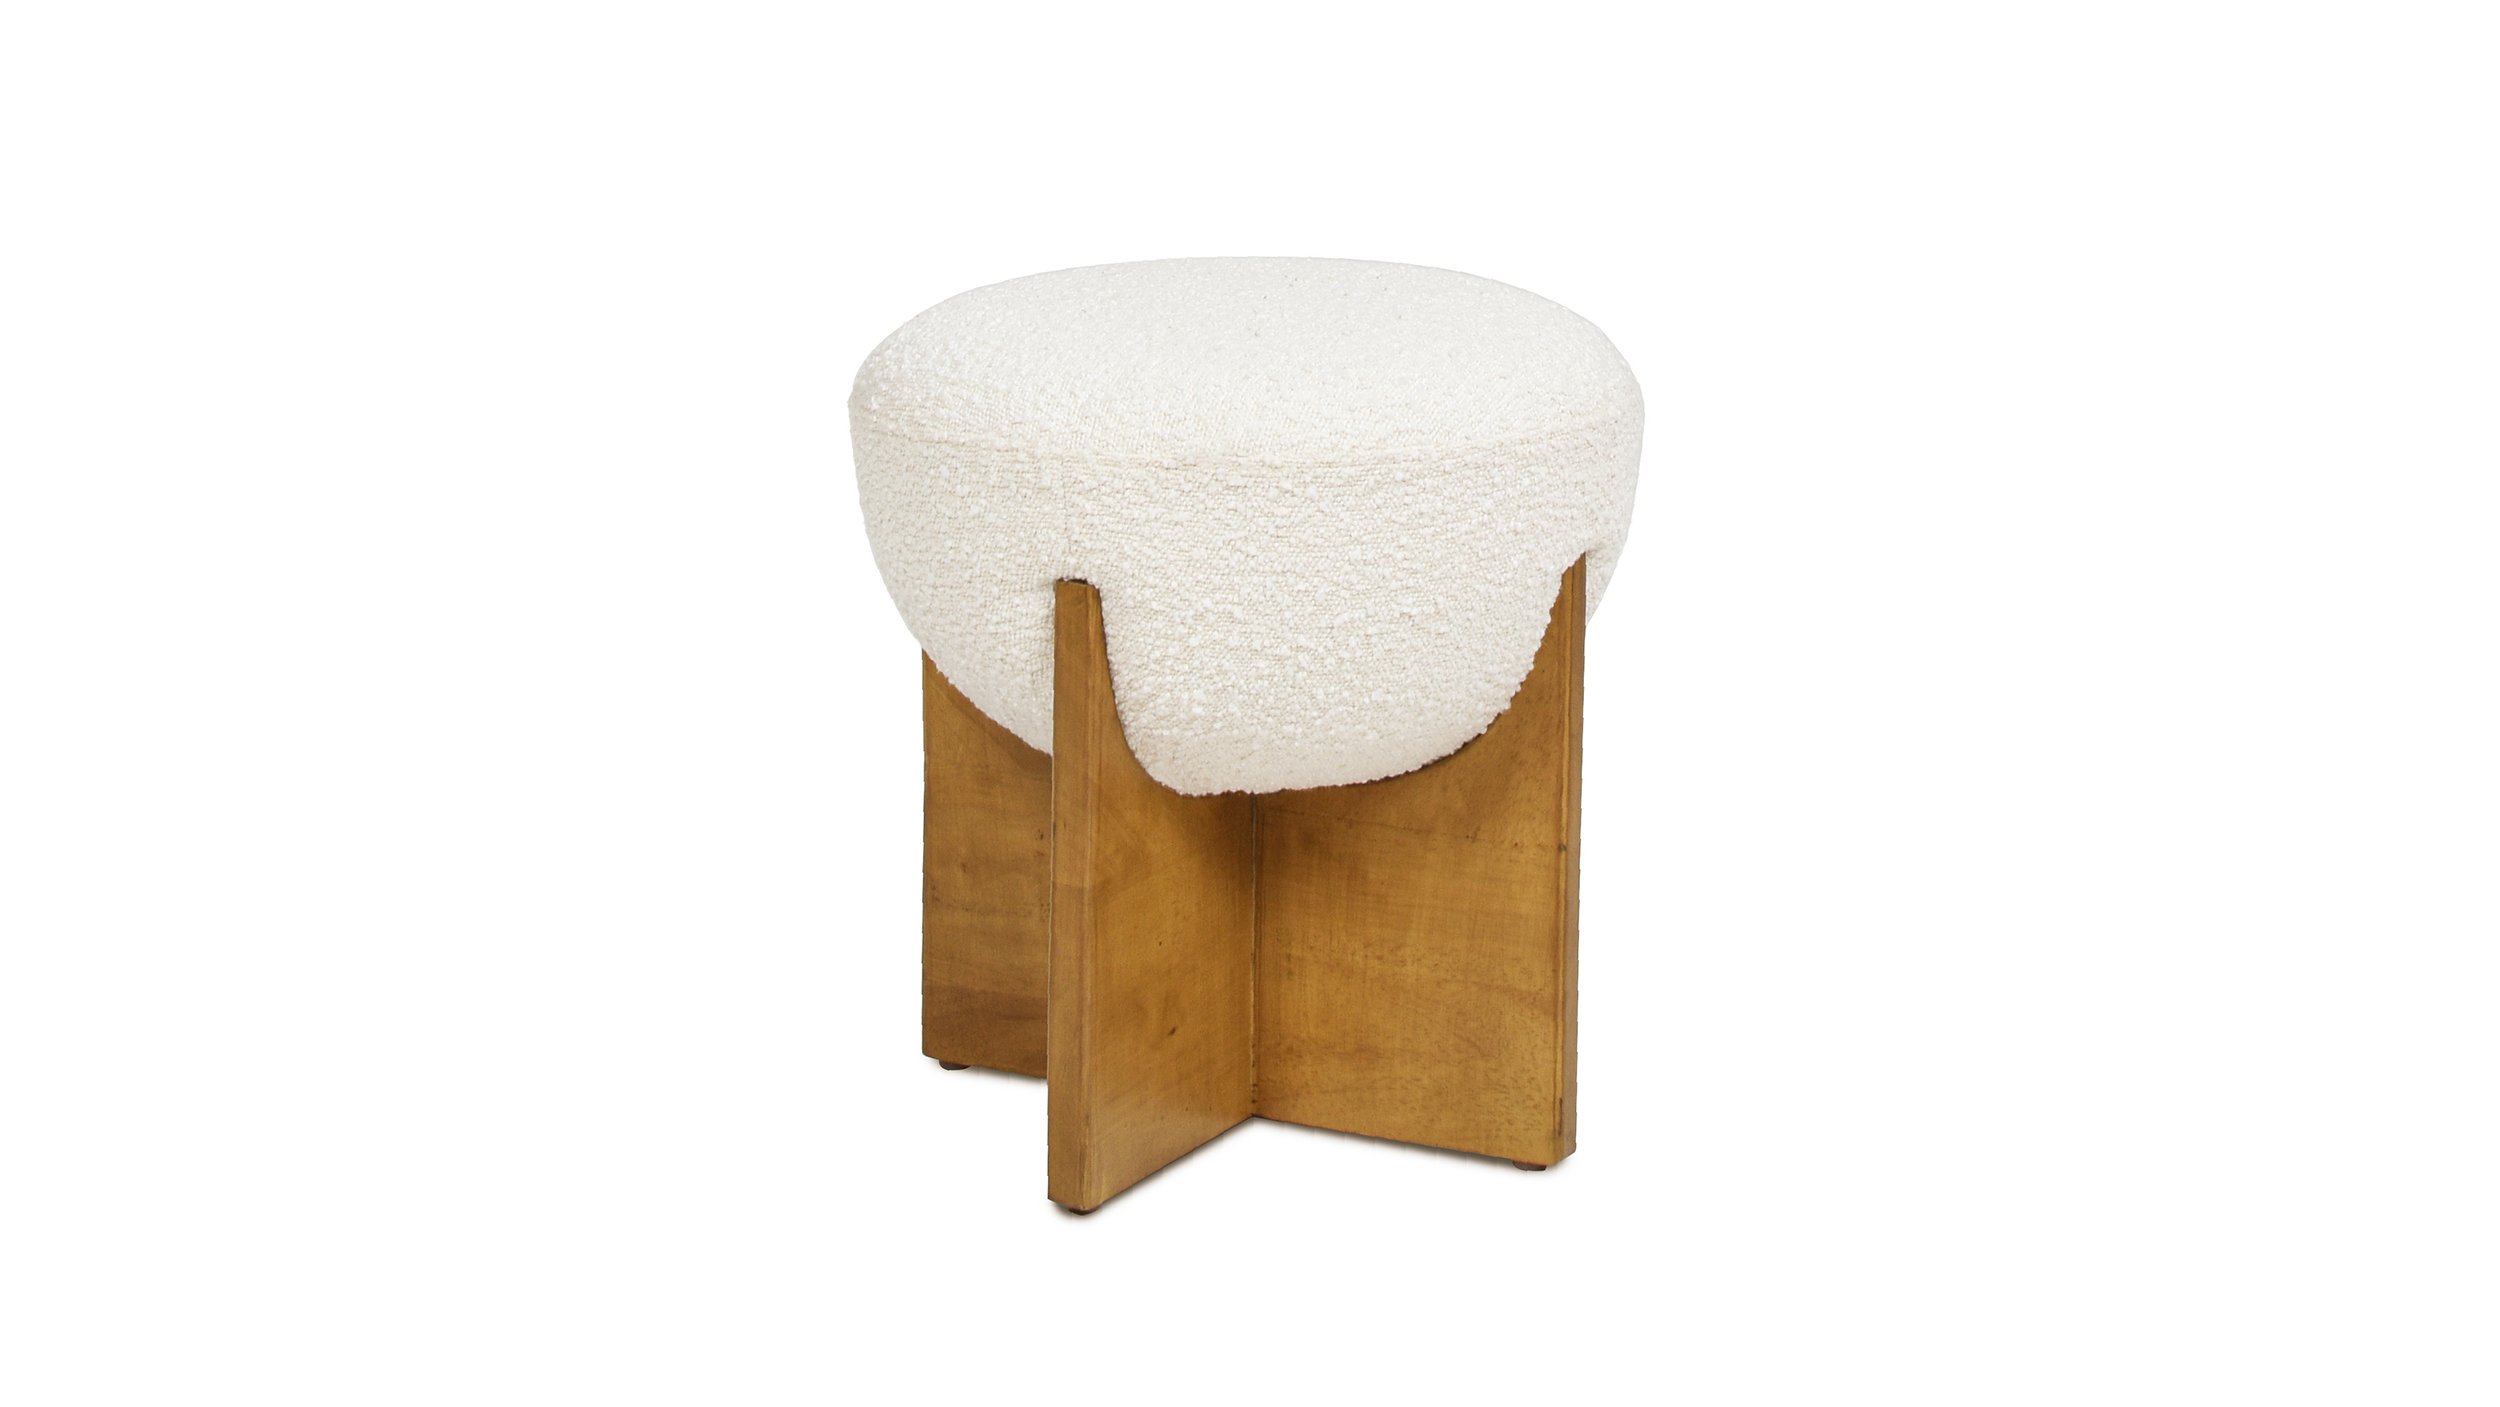 Sherpa Ottoman Stool, Modern S-Shaped Boucle Vanity Stool Pouf Ottoman Seat,  Decorative Floor Chair Foot Stool for Makeup Room, Bedroom, Living Room